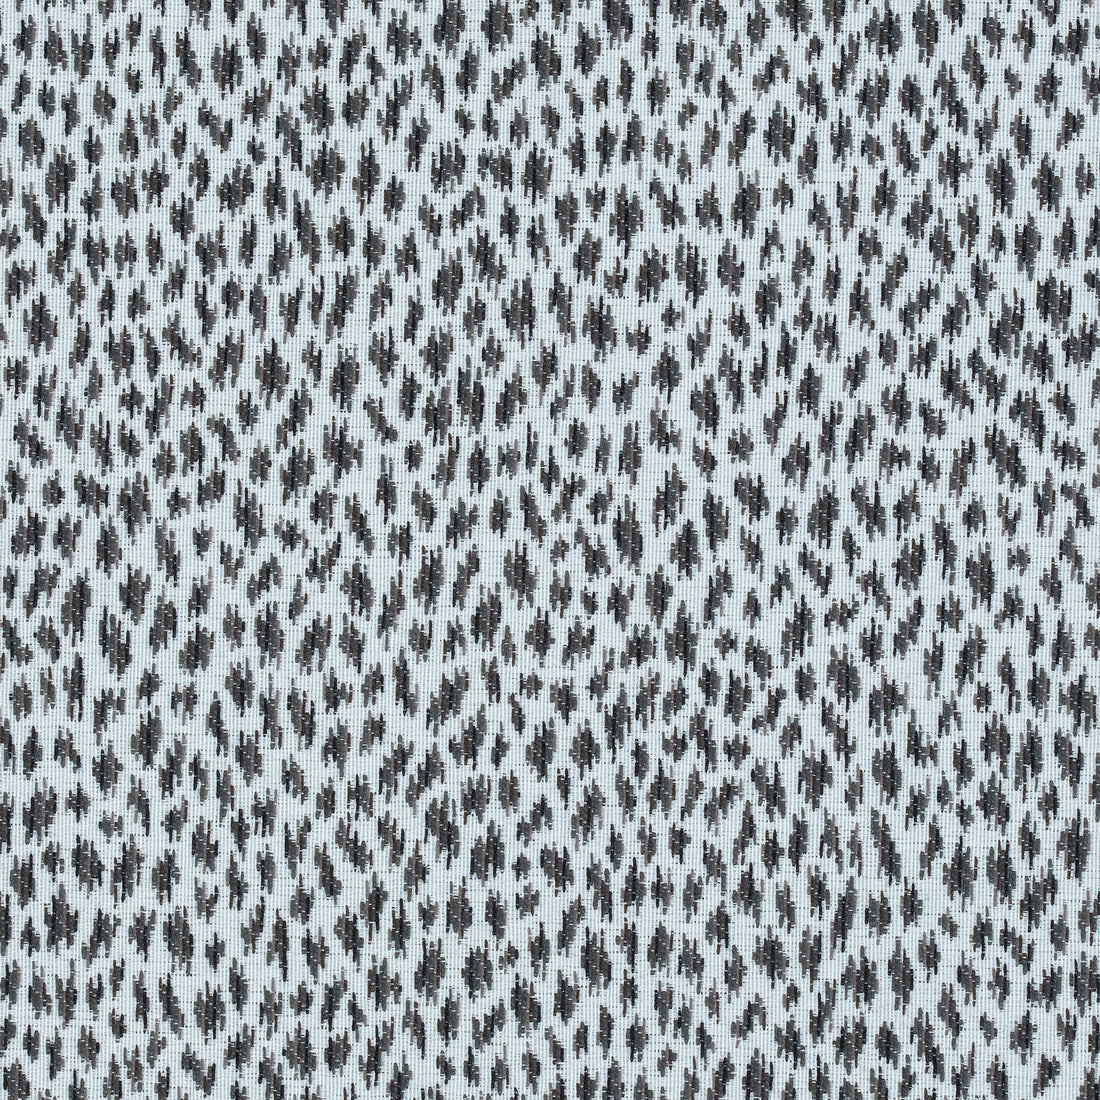 Citra fabric in black color - pattern number W80460 - by Thibaut in the Woven Resource Vol 10 Menagerie collection